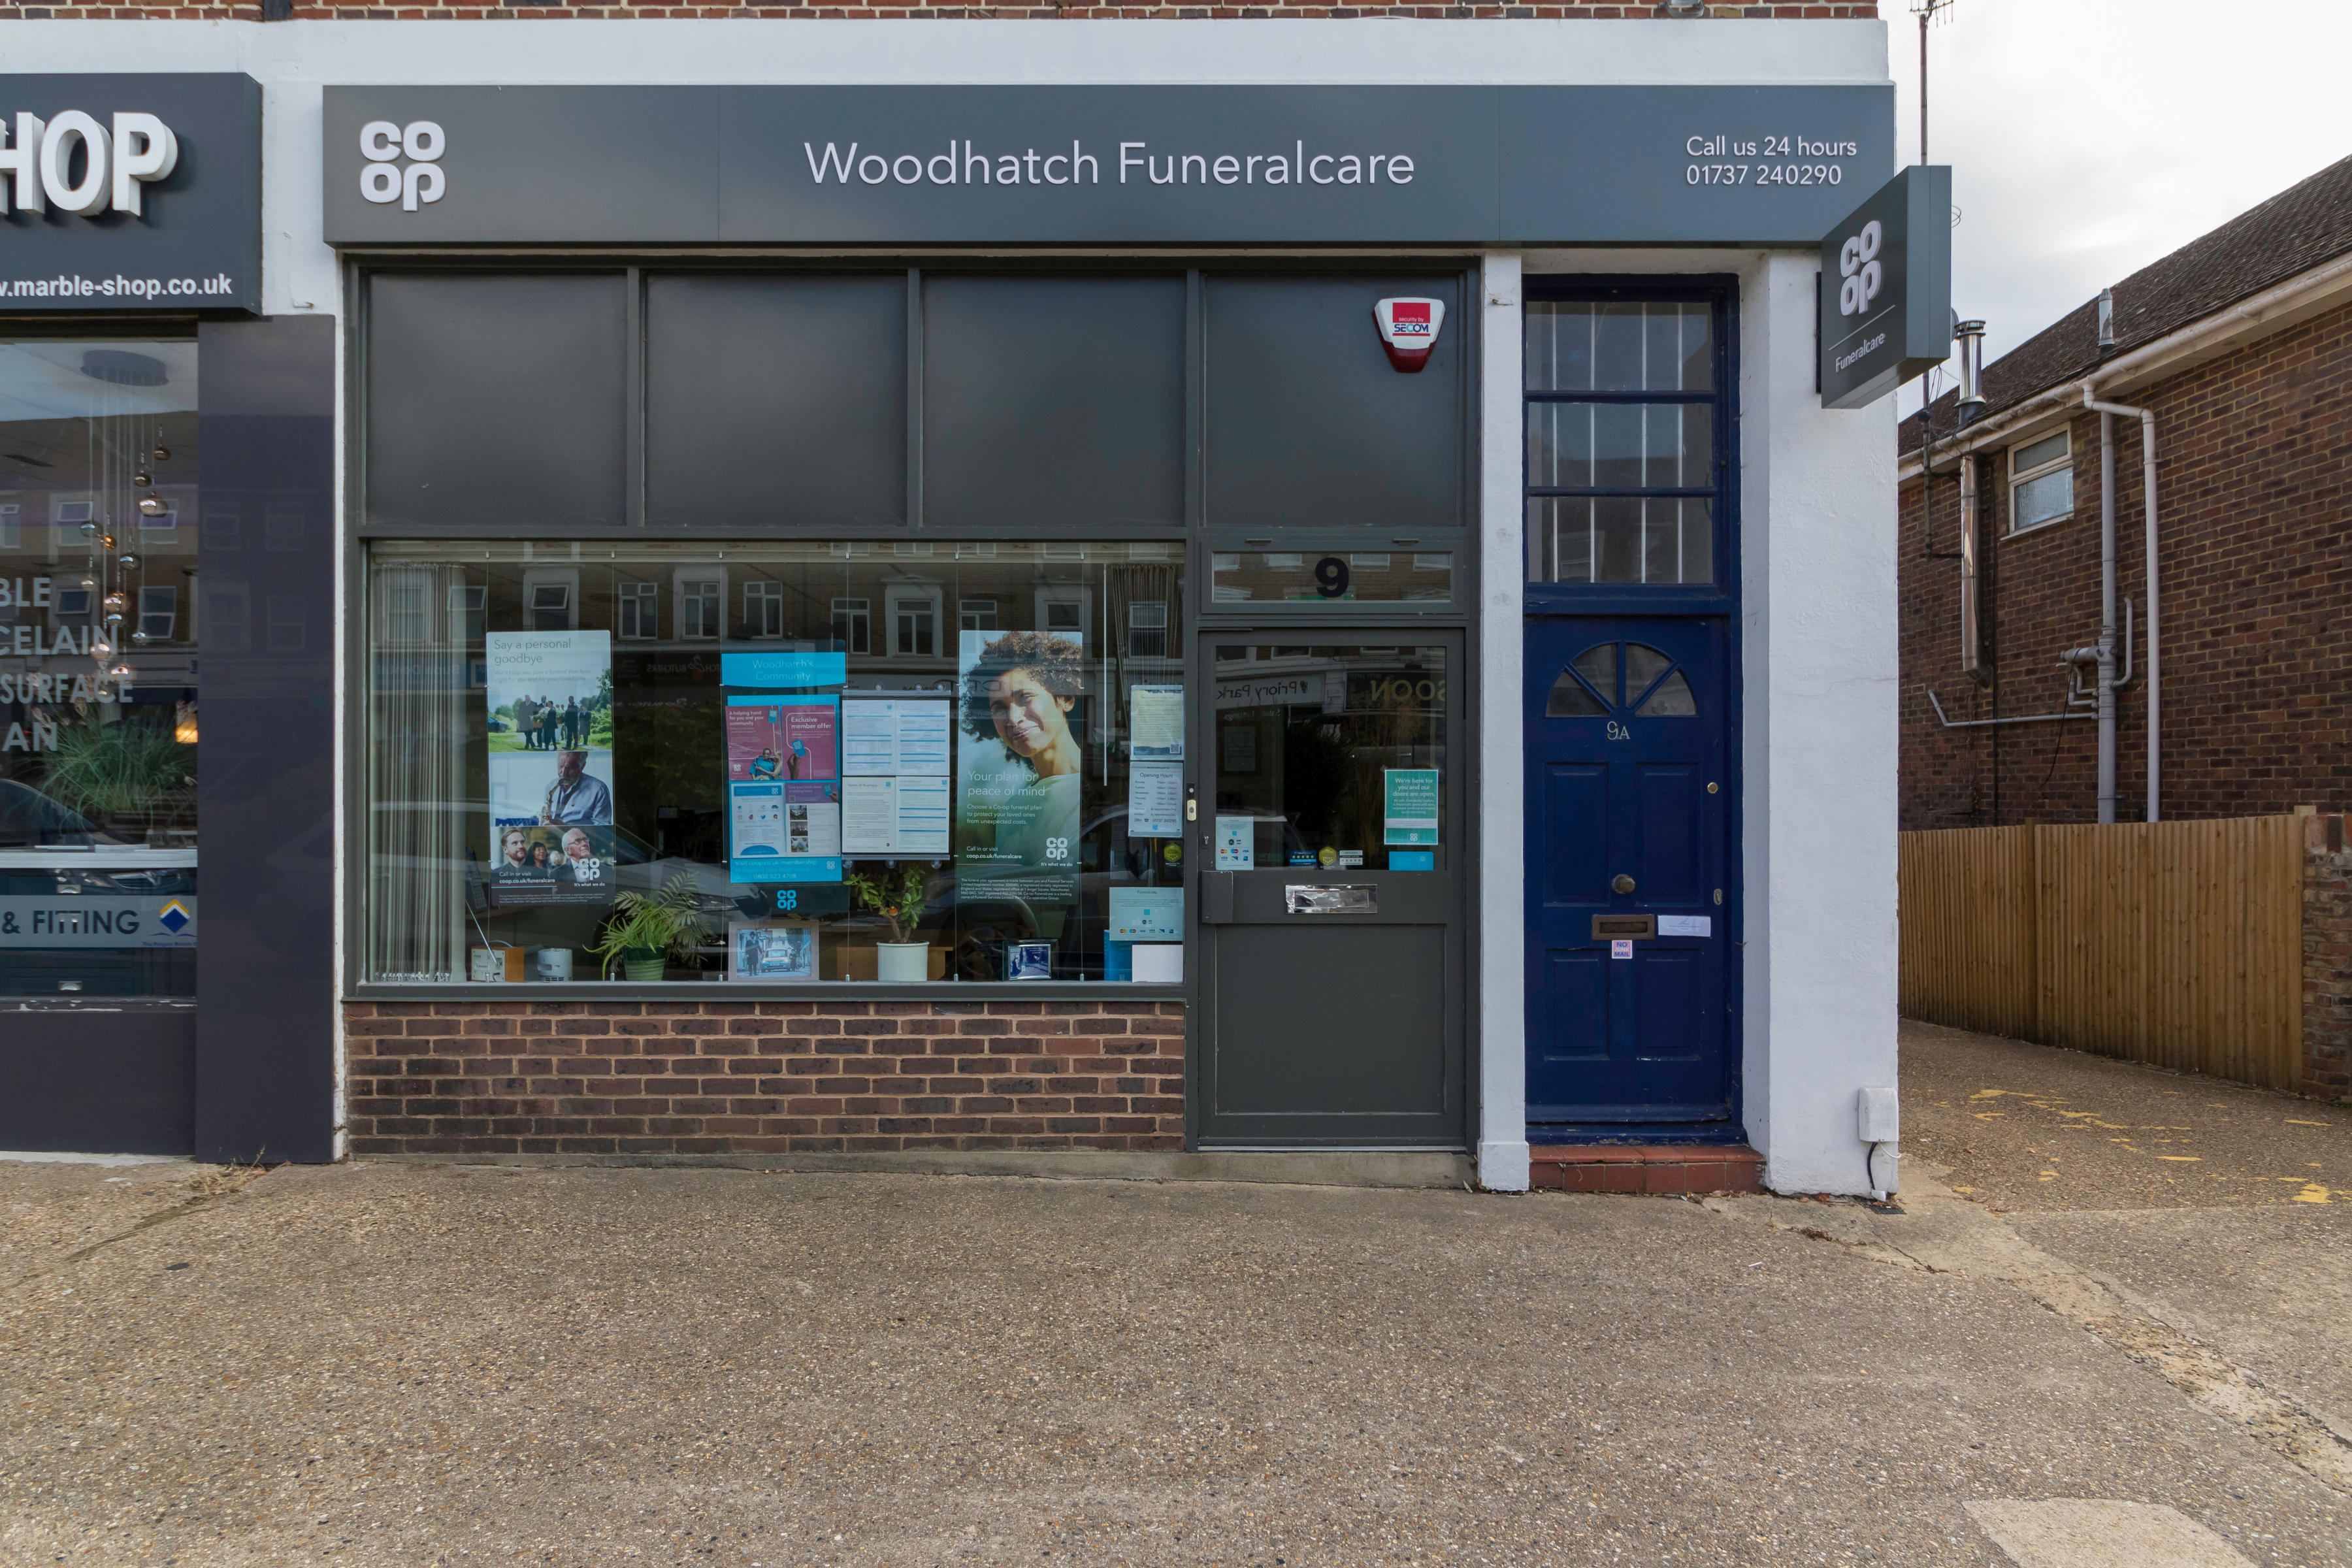 Images Woodhatch Funeralcare